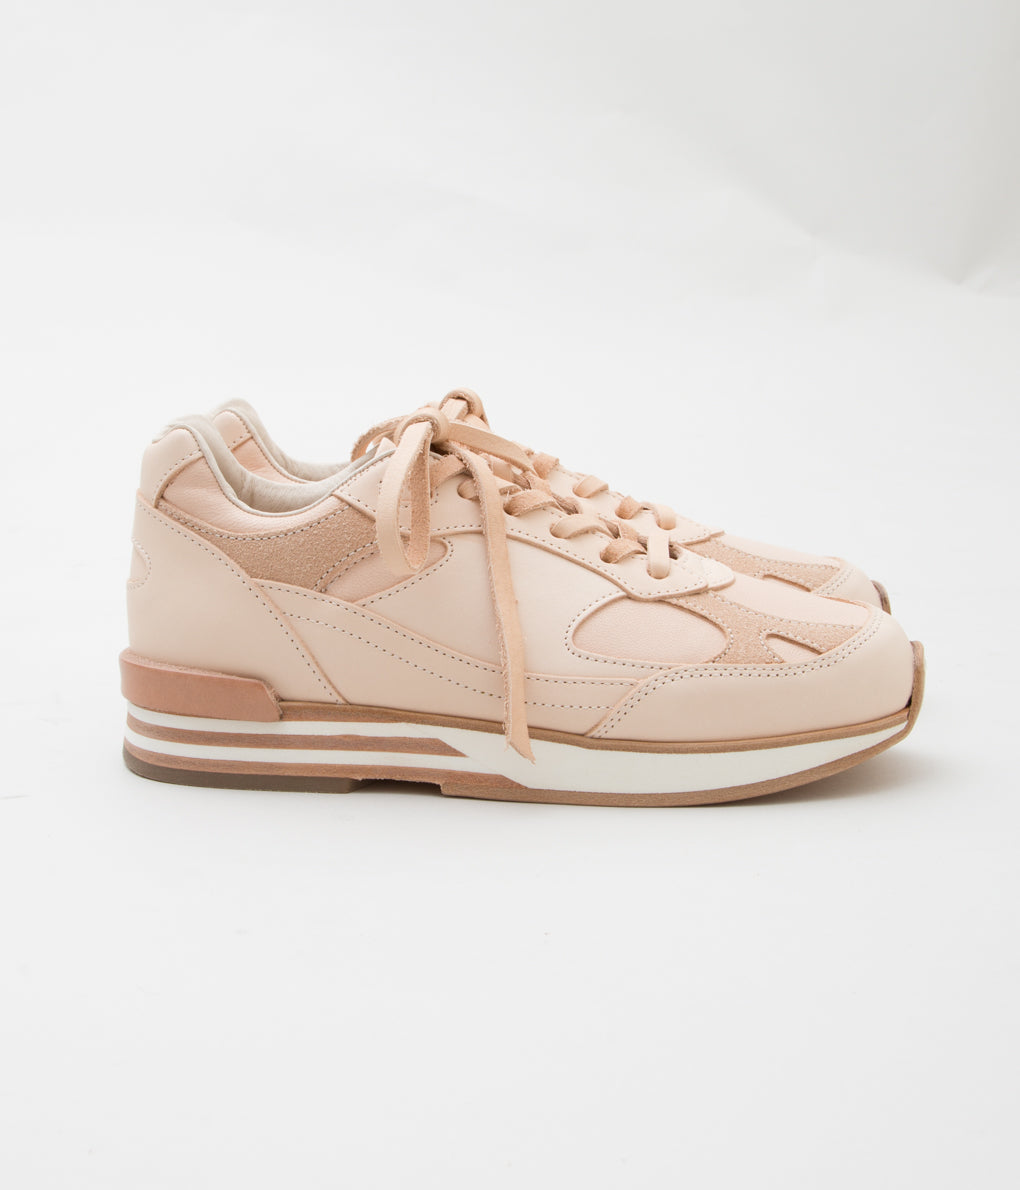 HENDER SCHEME "manual industrial products 28"(NATURAL)